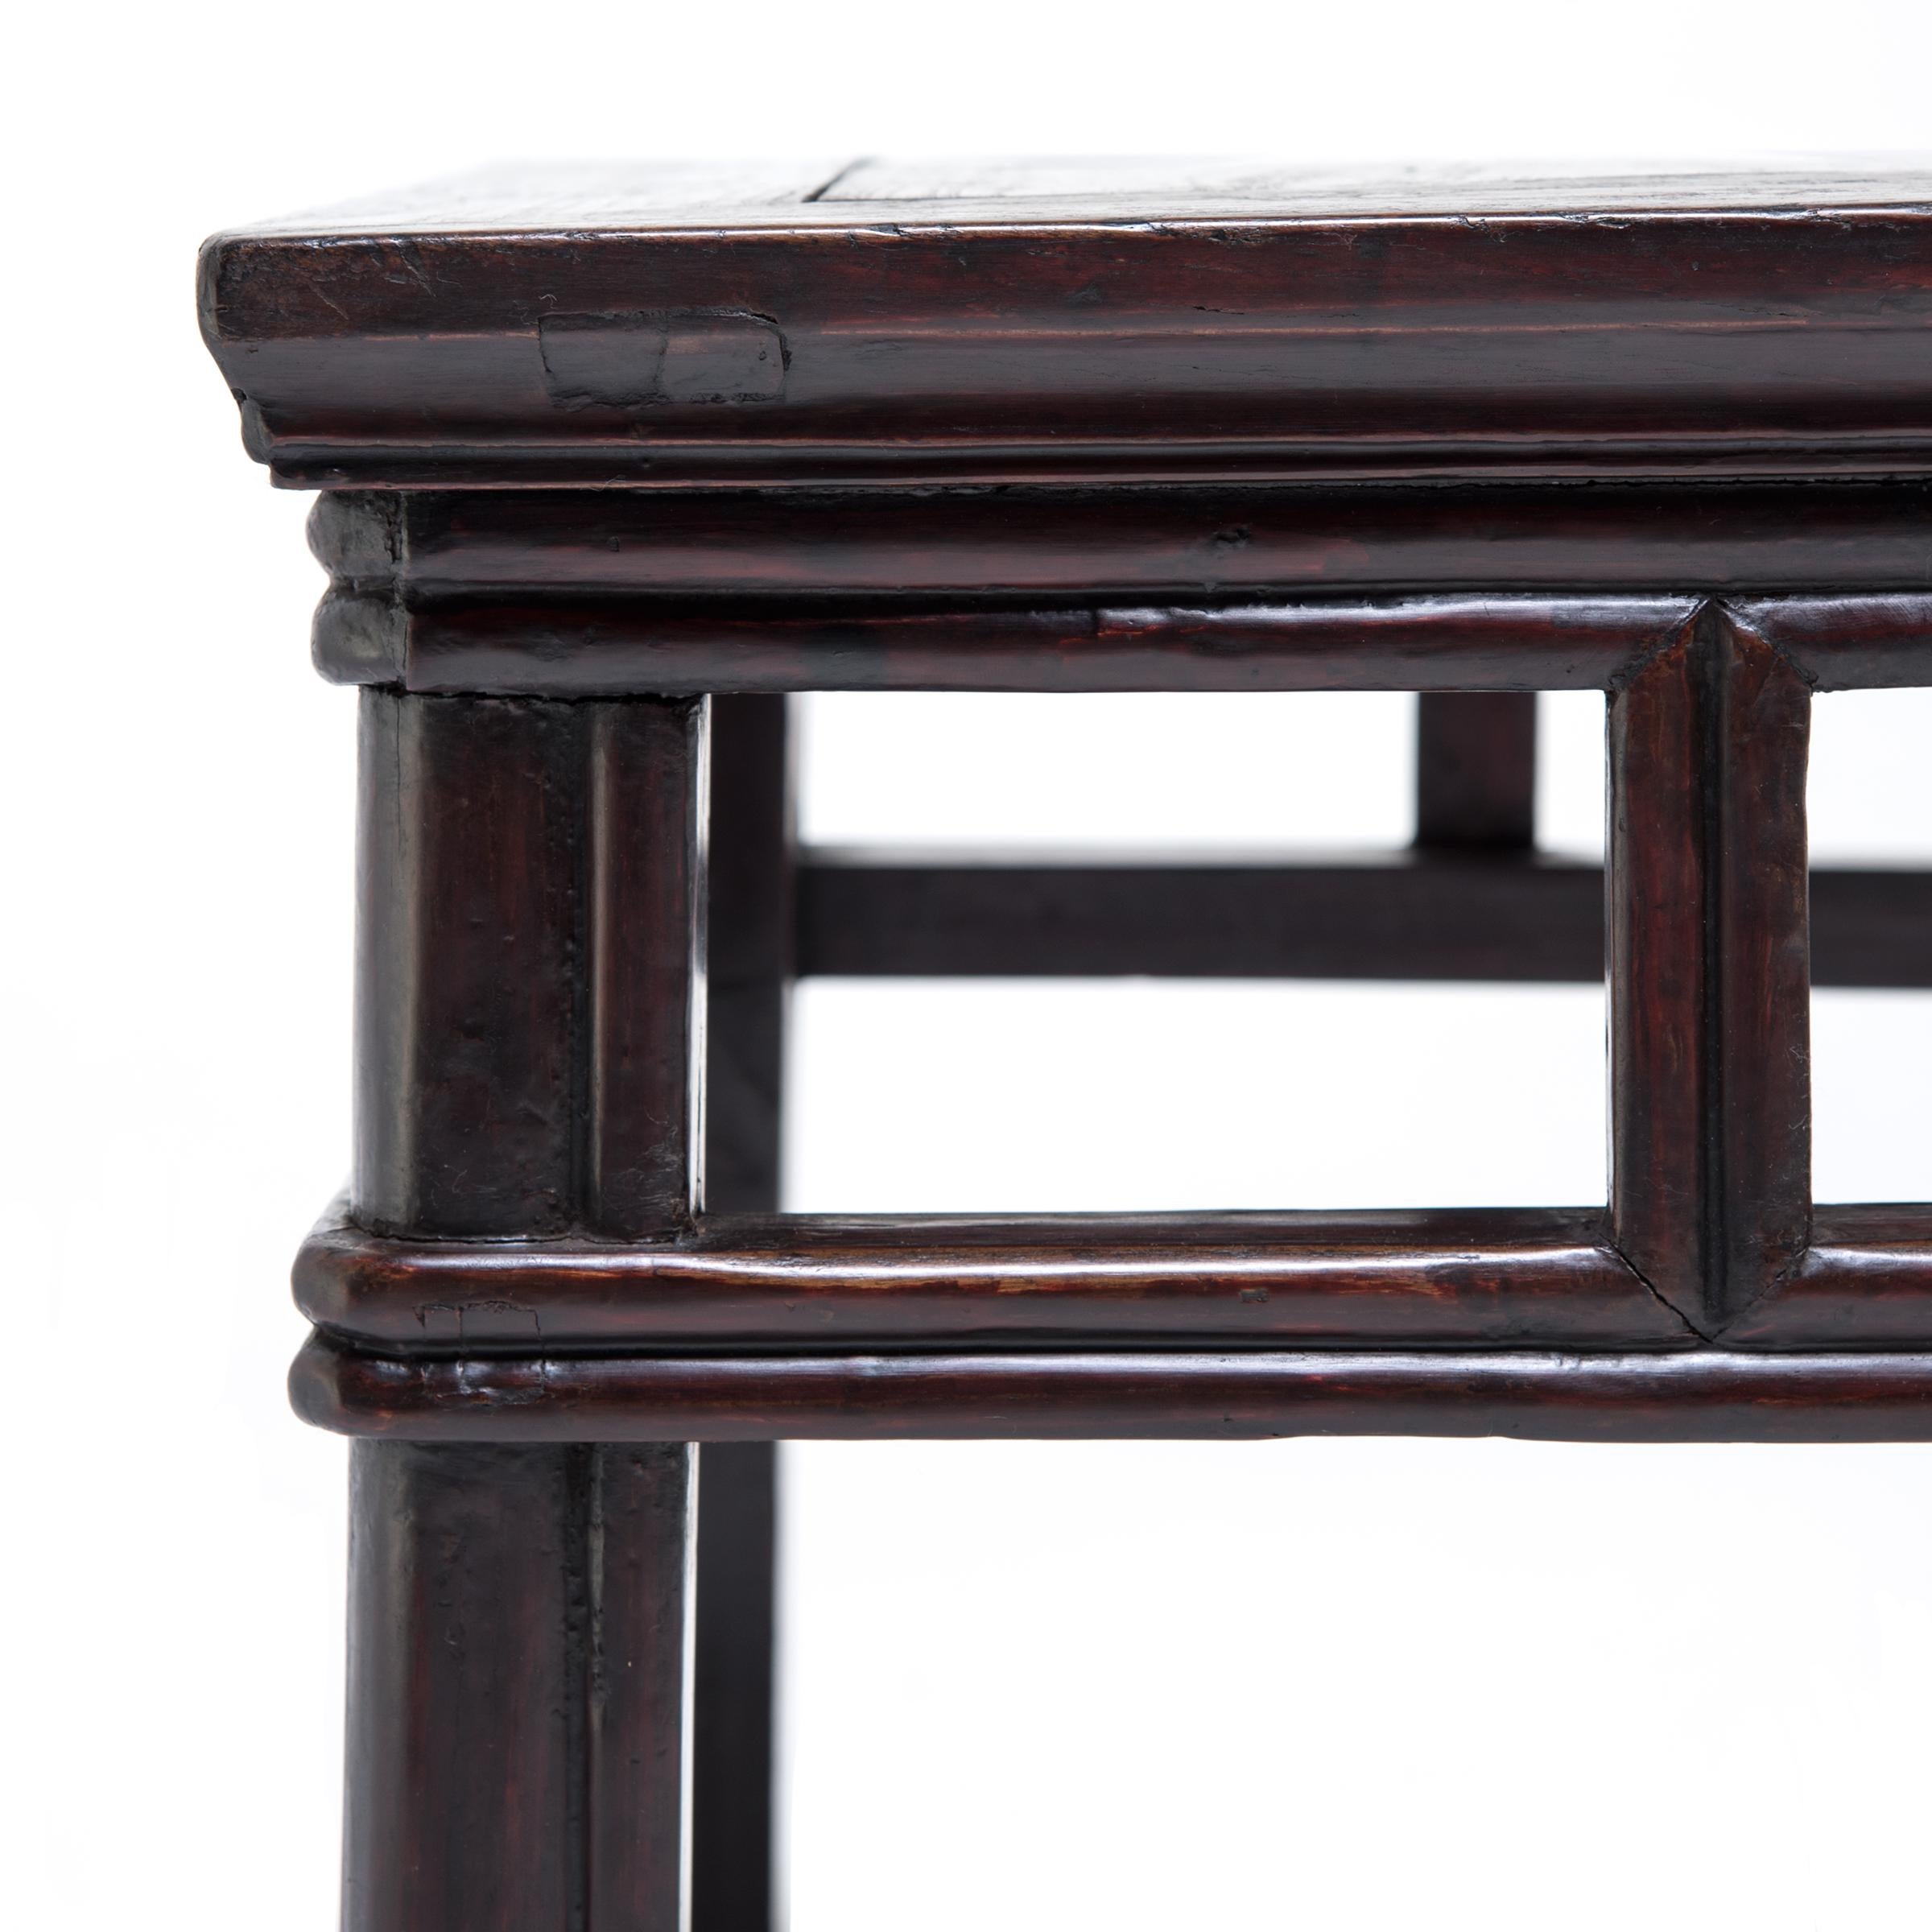 19th Century Chinese Black Lacquer Square Stool, c. 1850 For Sale